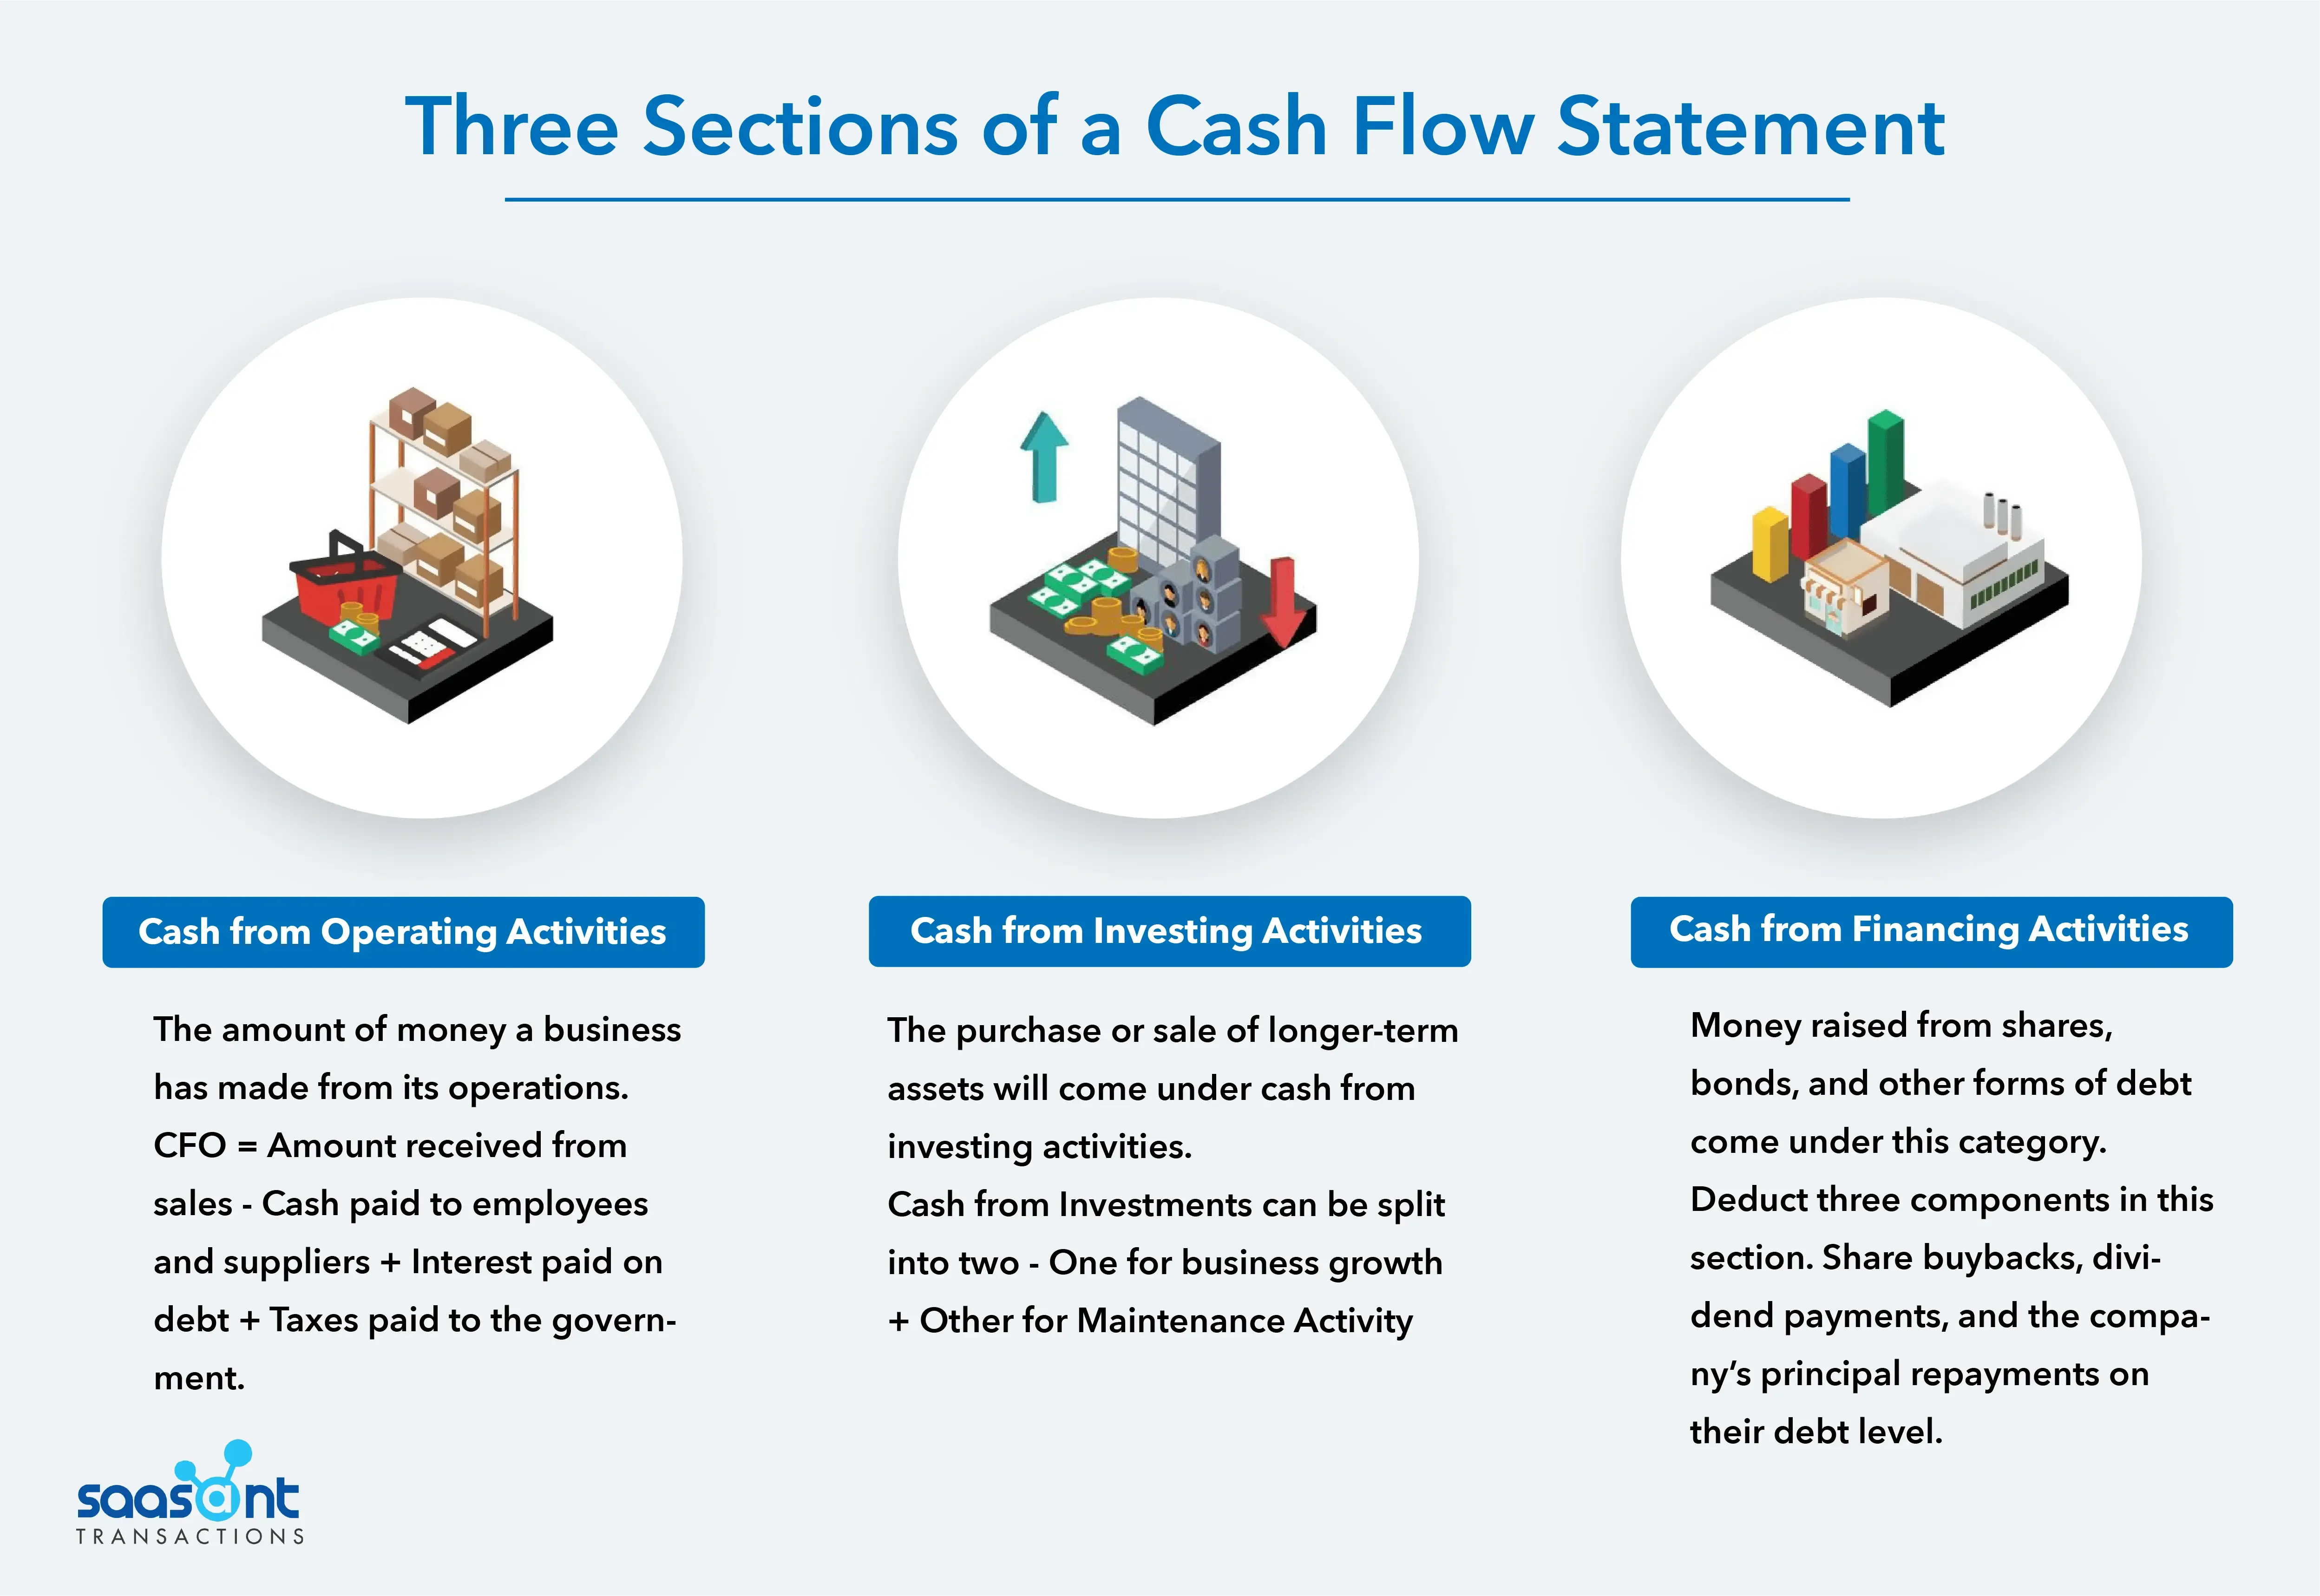 Three sections of a cash flow statement